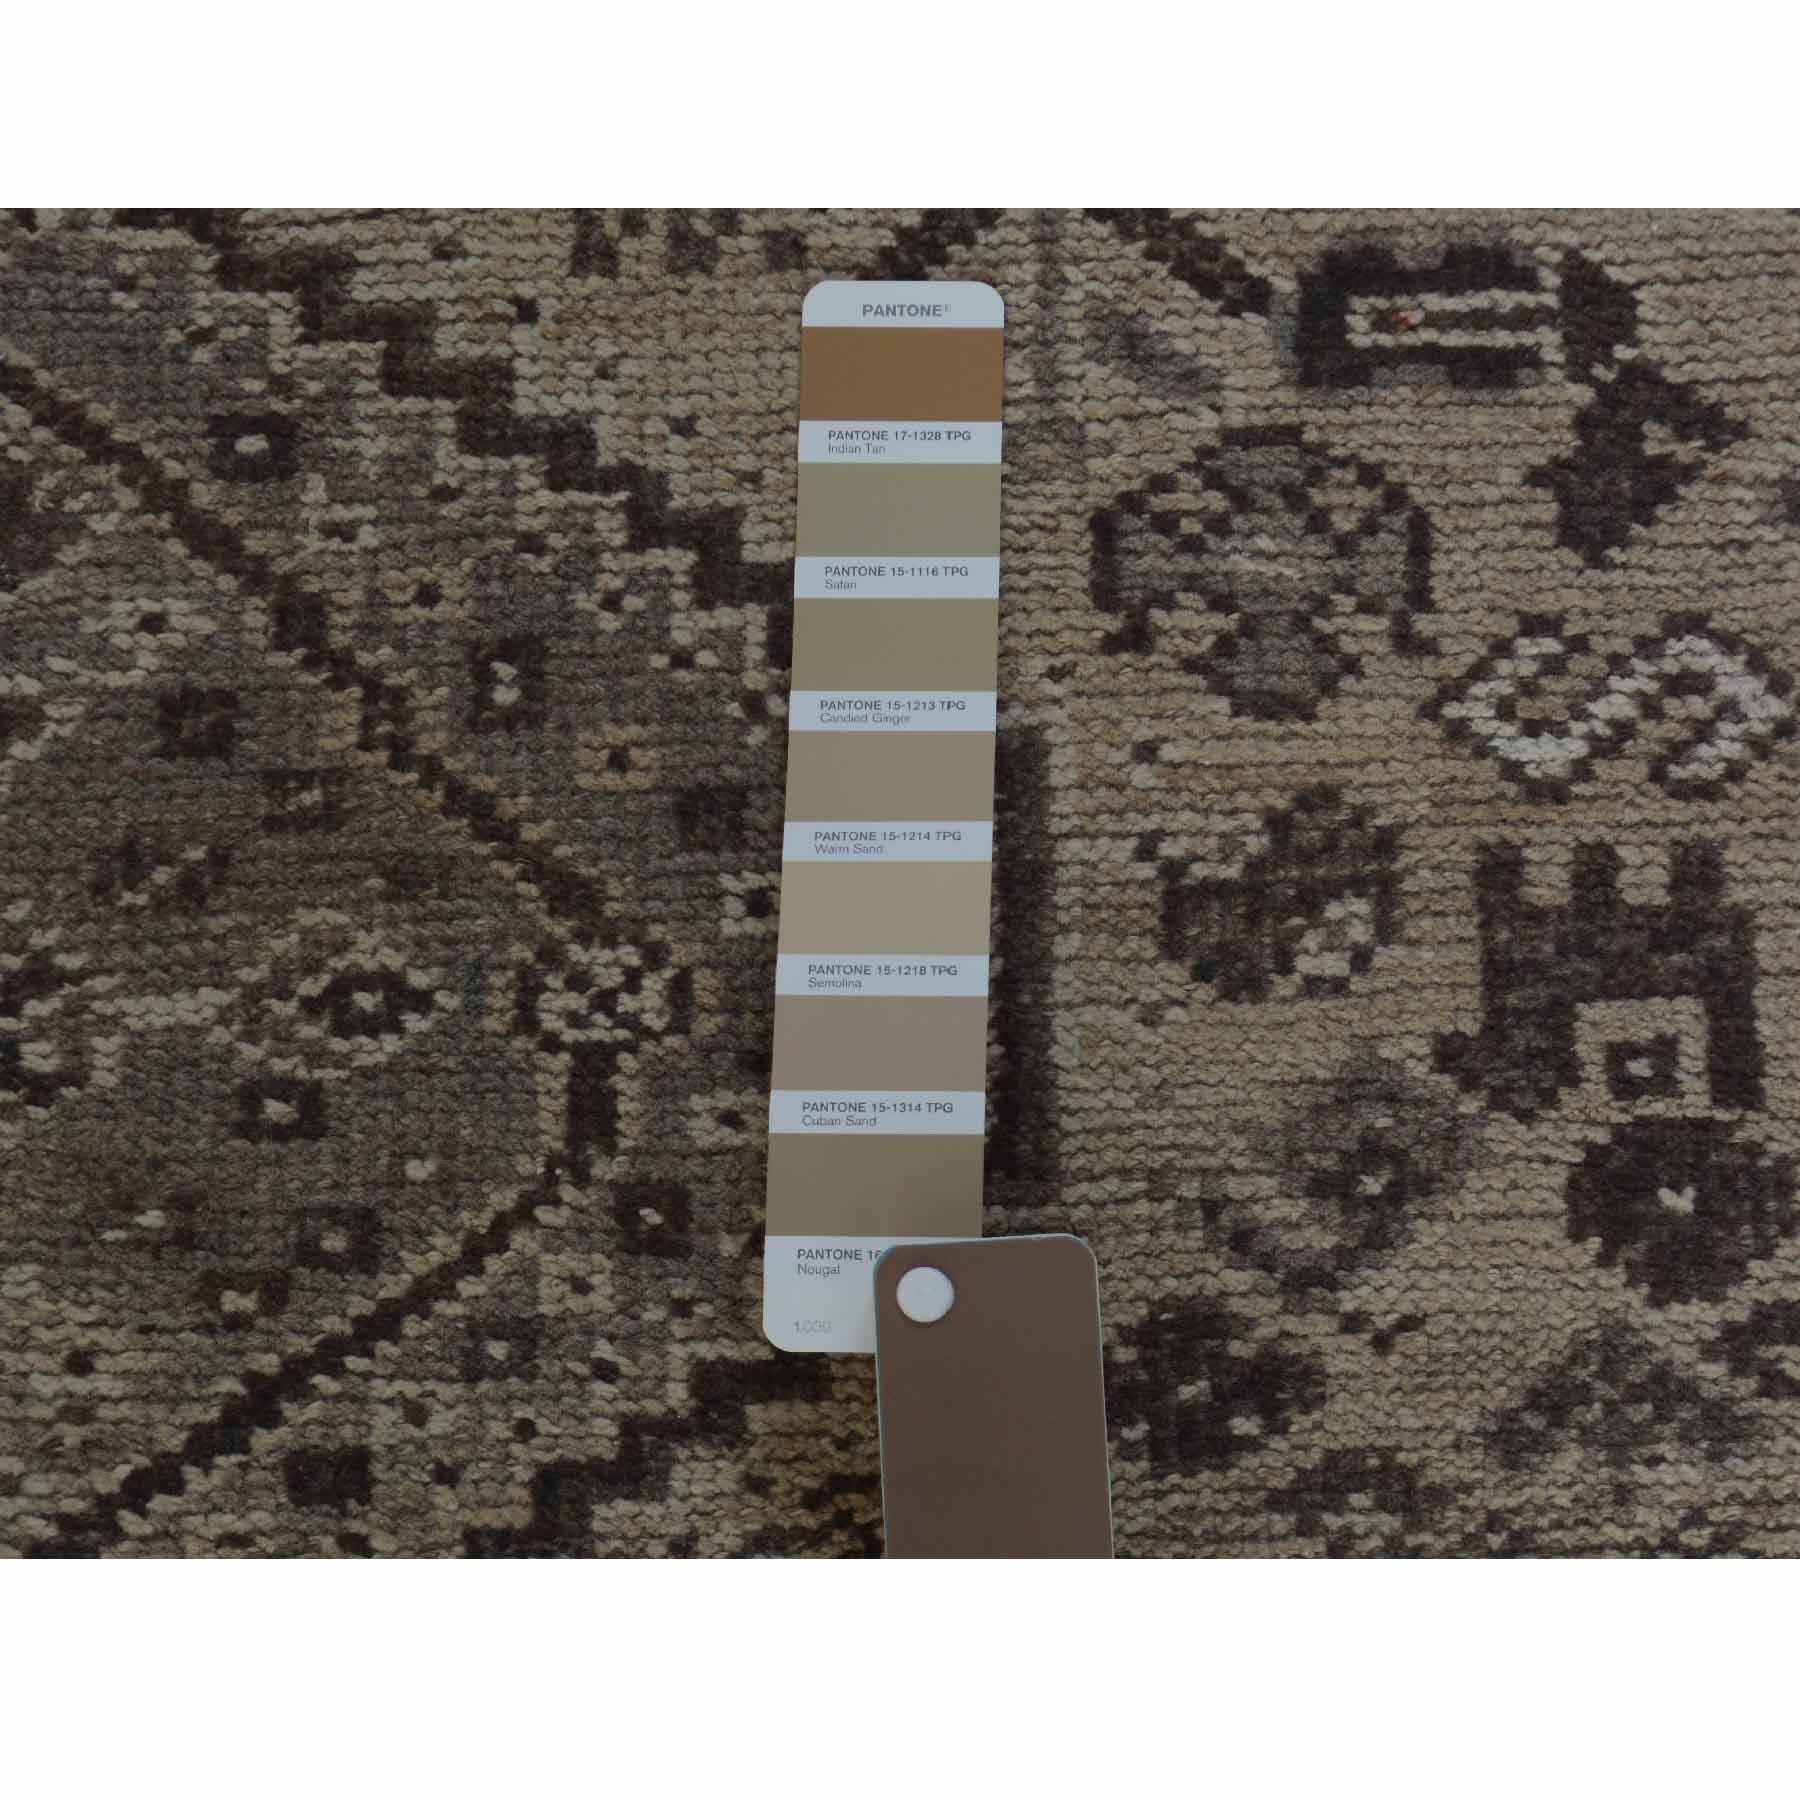 Overdyed-Vintage-Hand-Knotted-Rug-286185